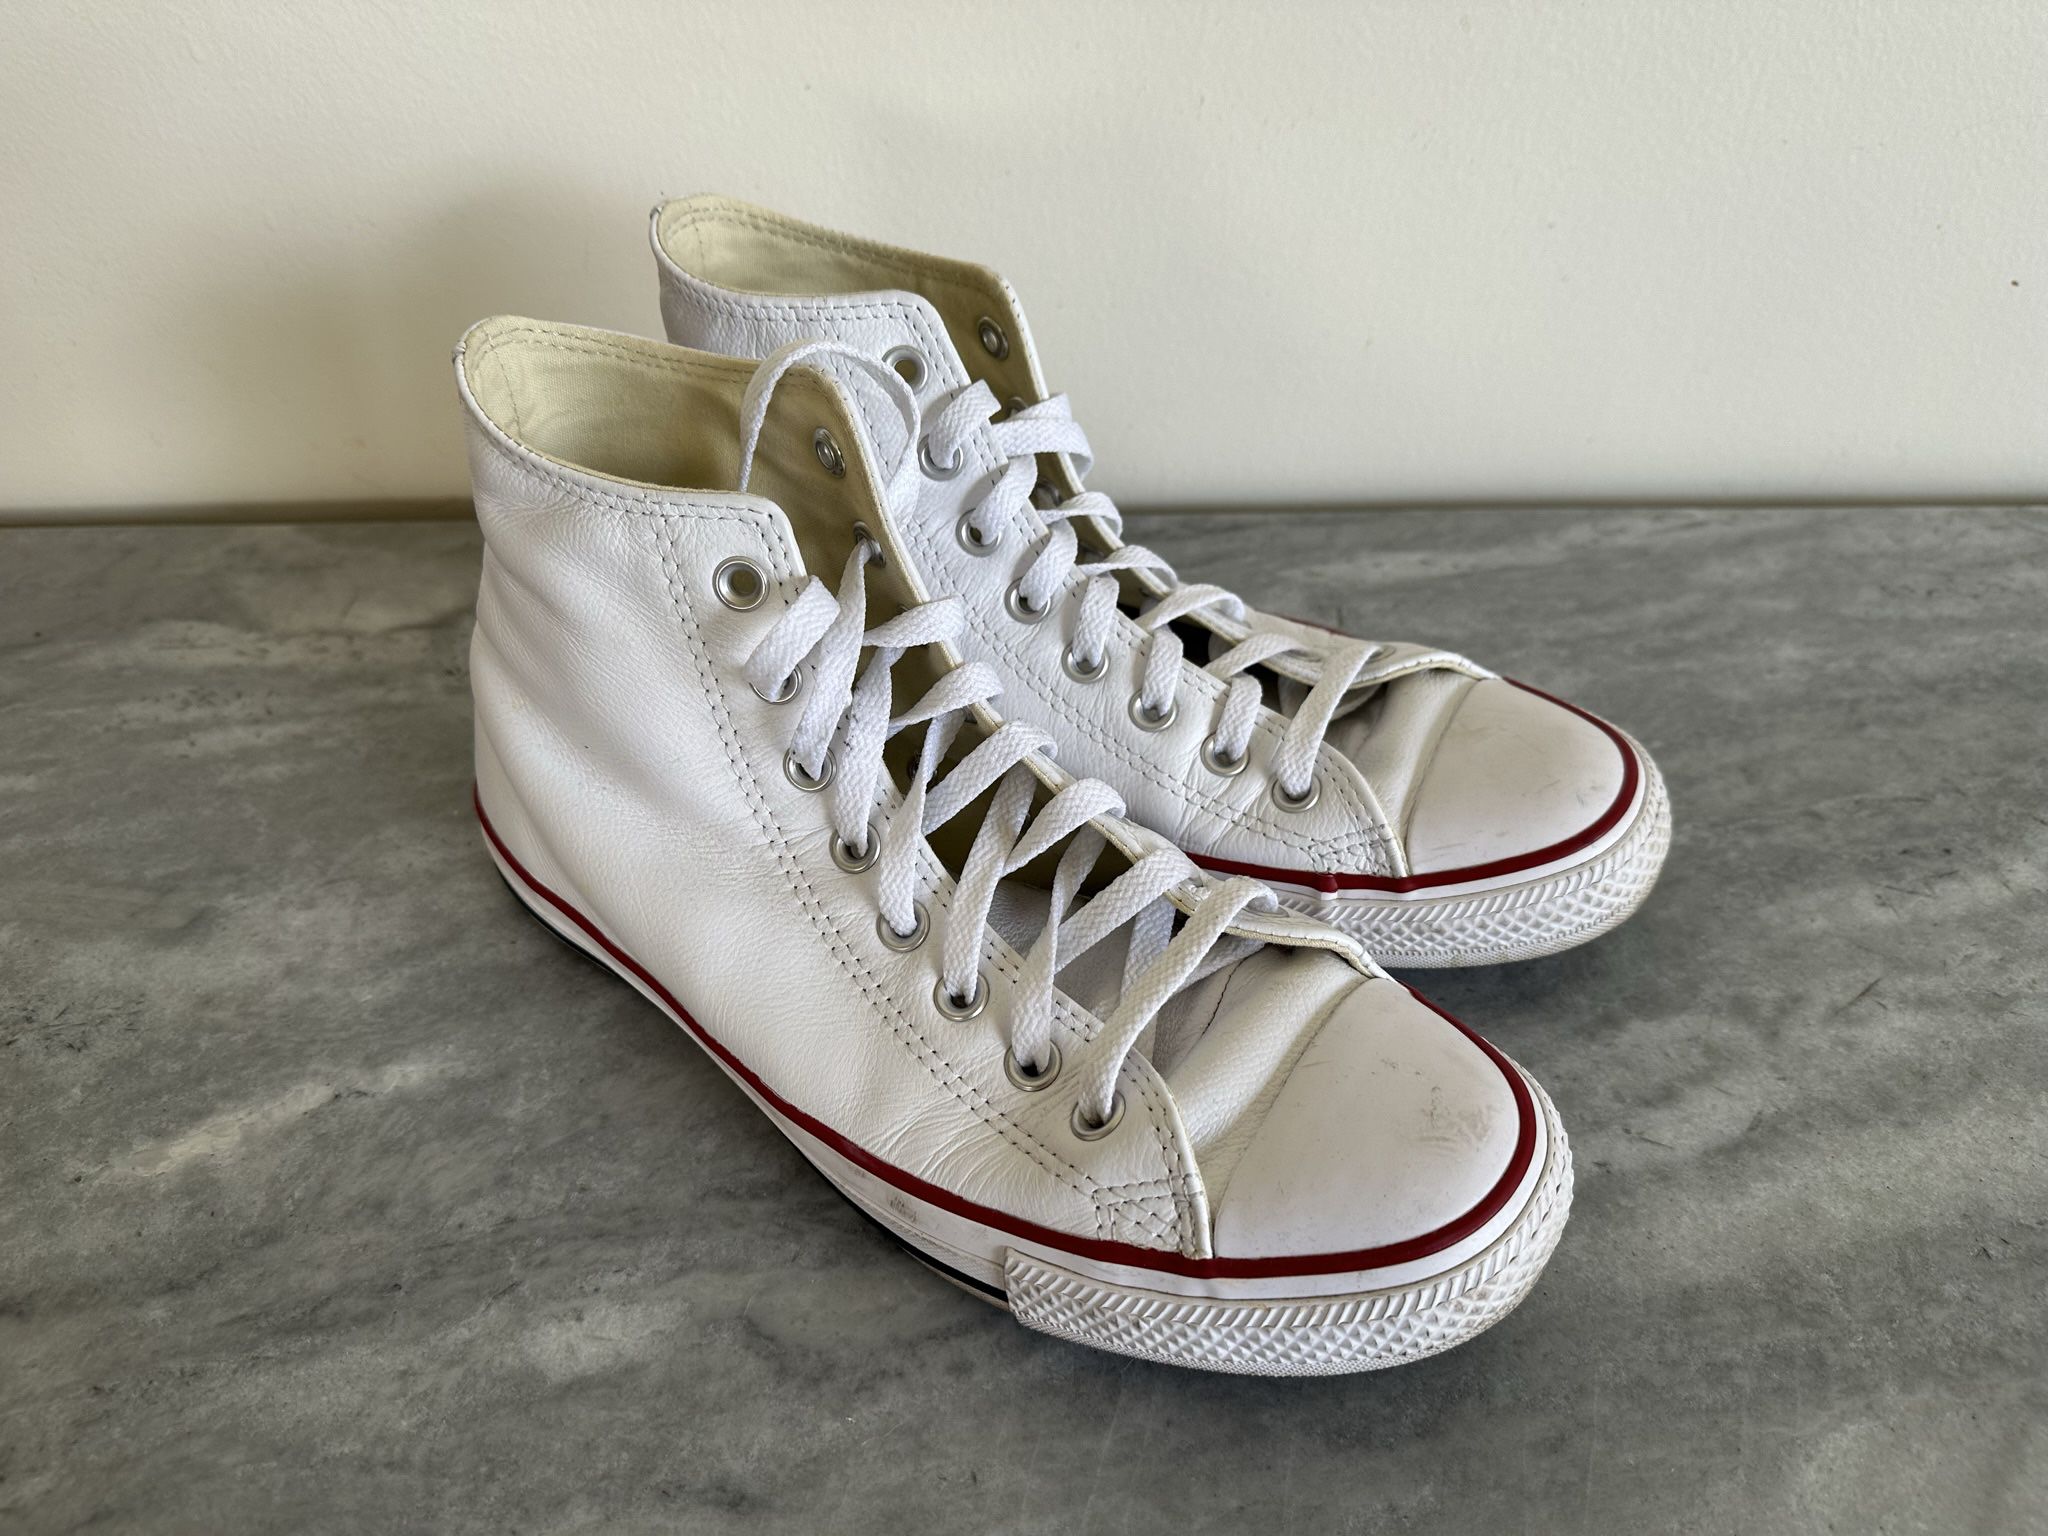 2 Pairs of Converse Chuck Taylor’s